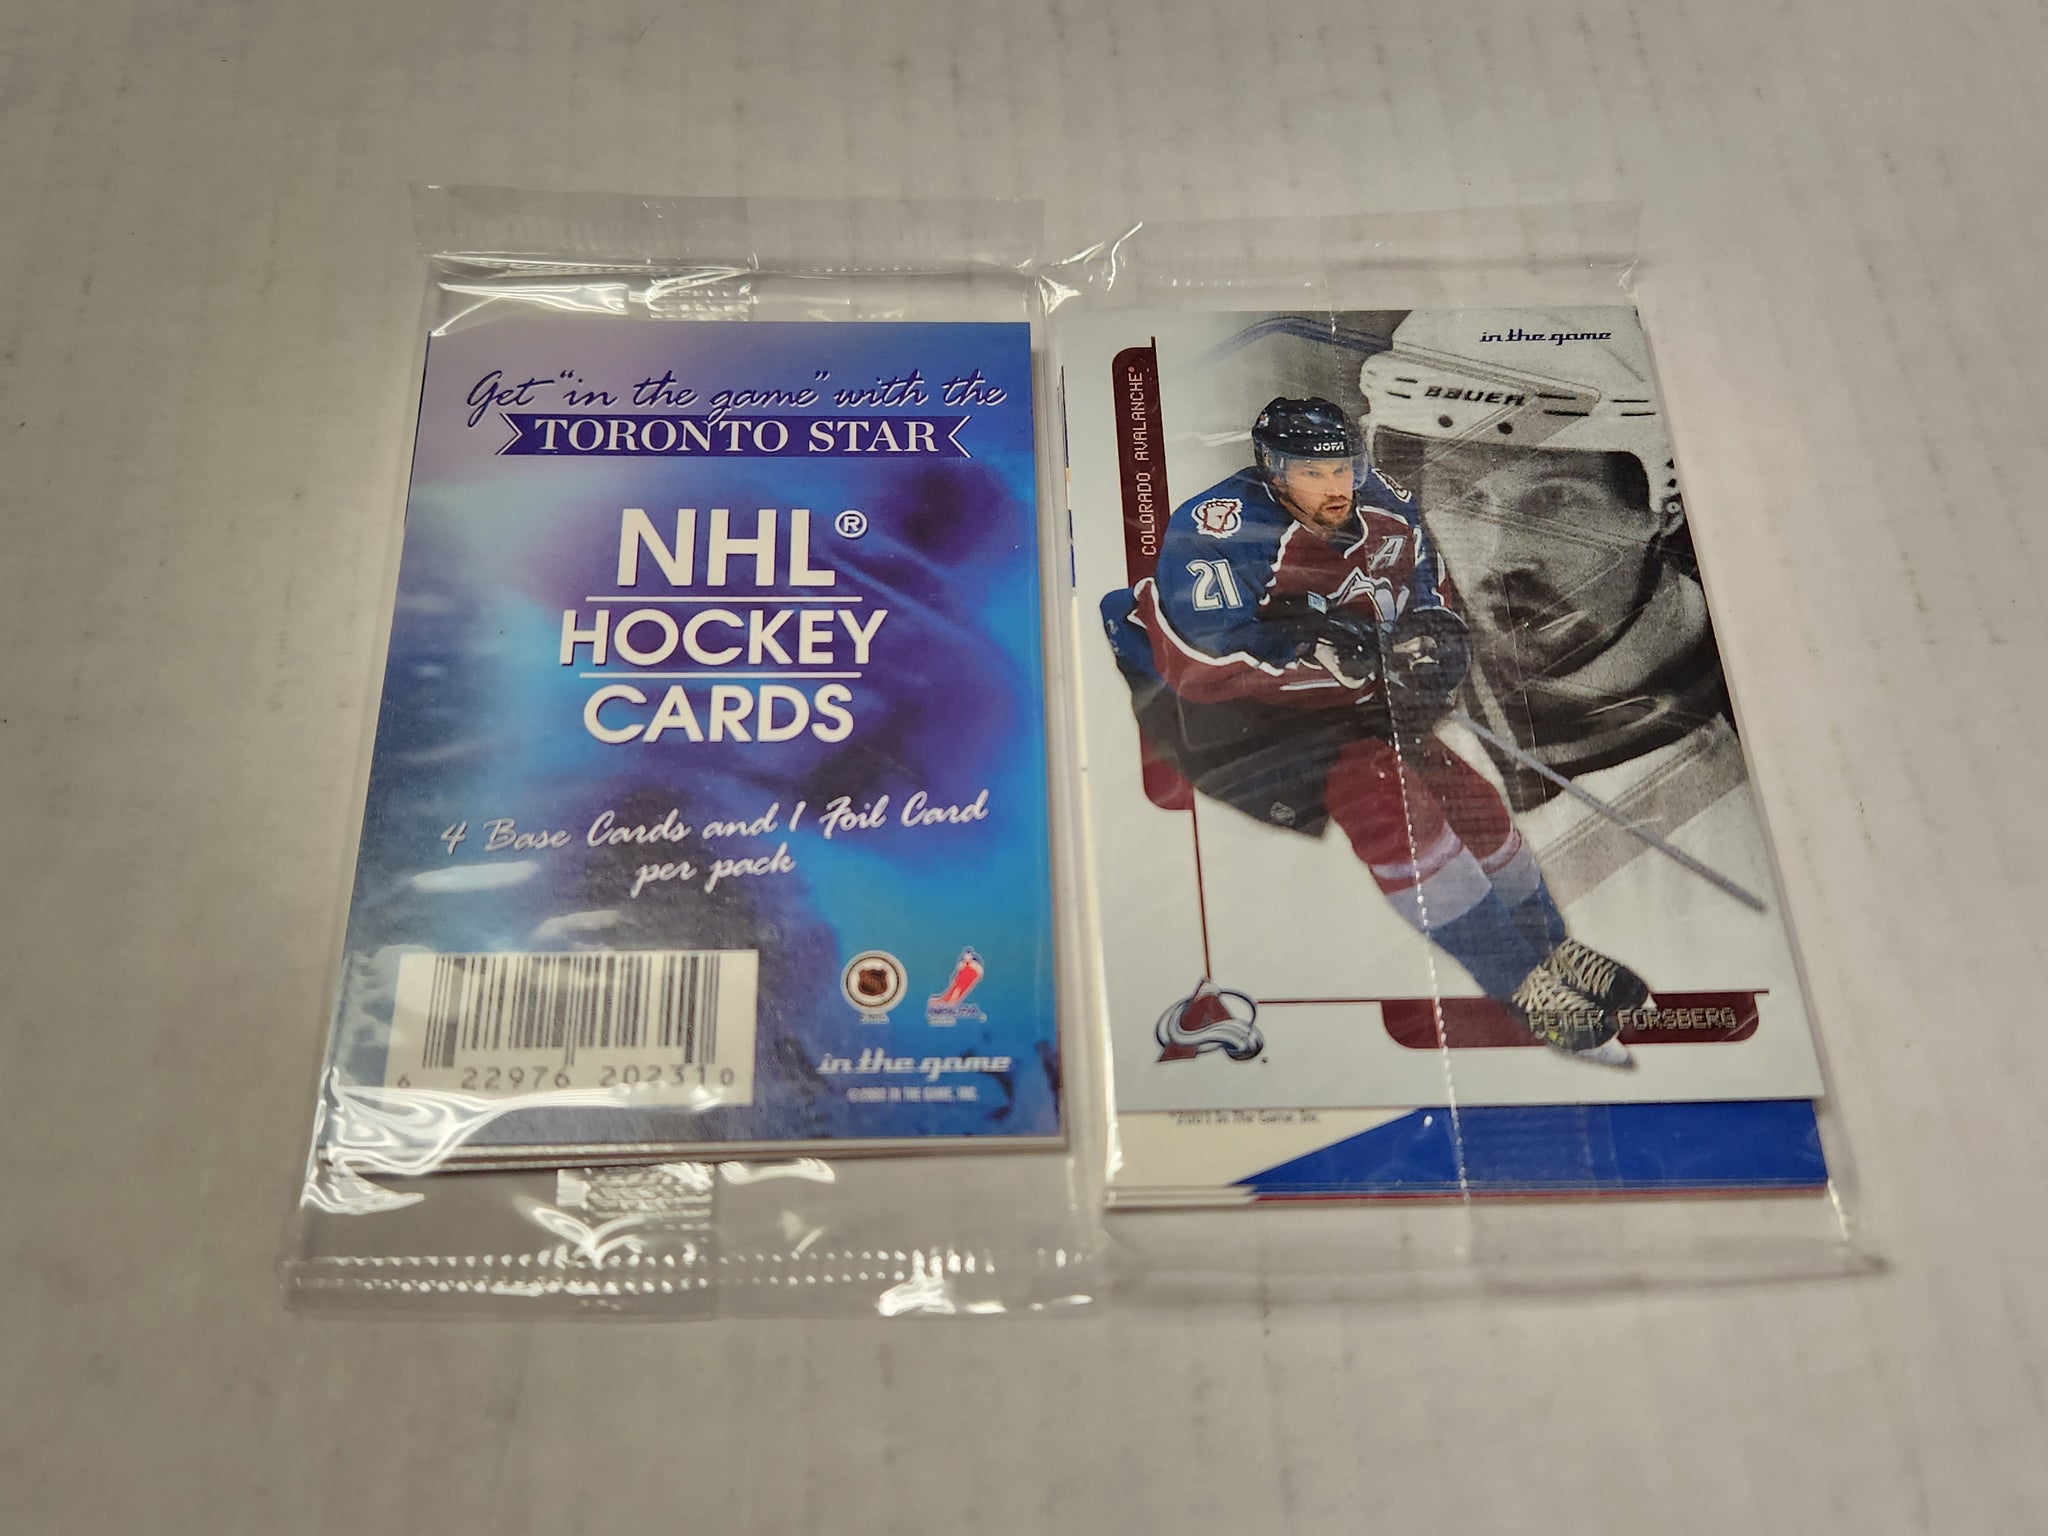 2003-04 Toronto Star In The Game (ITG) NHL Hockey Card Box (5 Total Collector Cards Per Pack, 1 Foil Per Pack) - Peter Forsberg Version